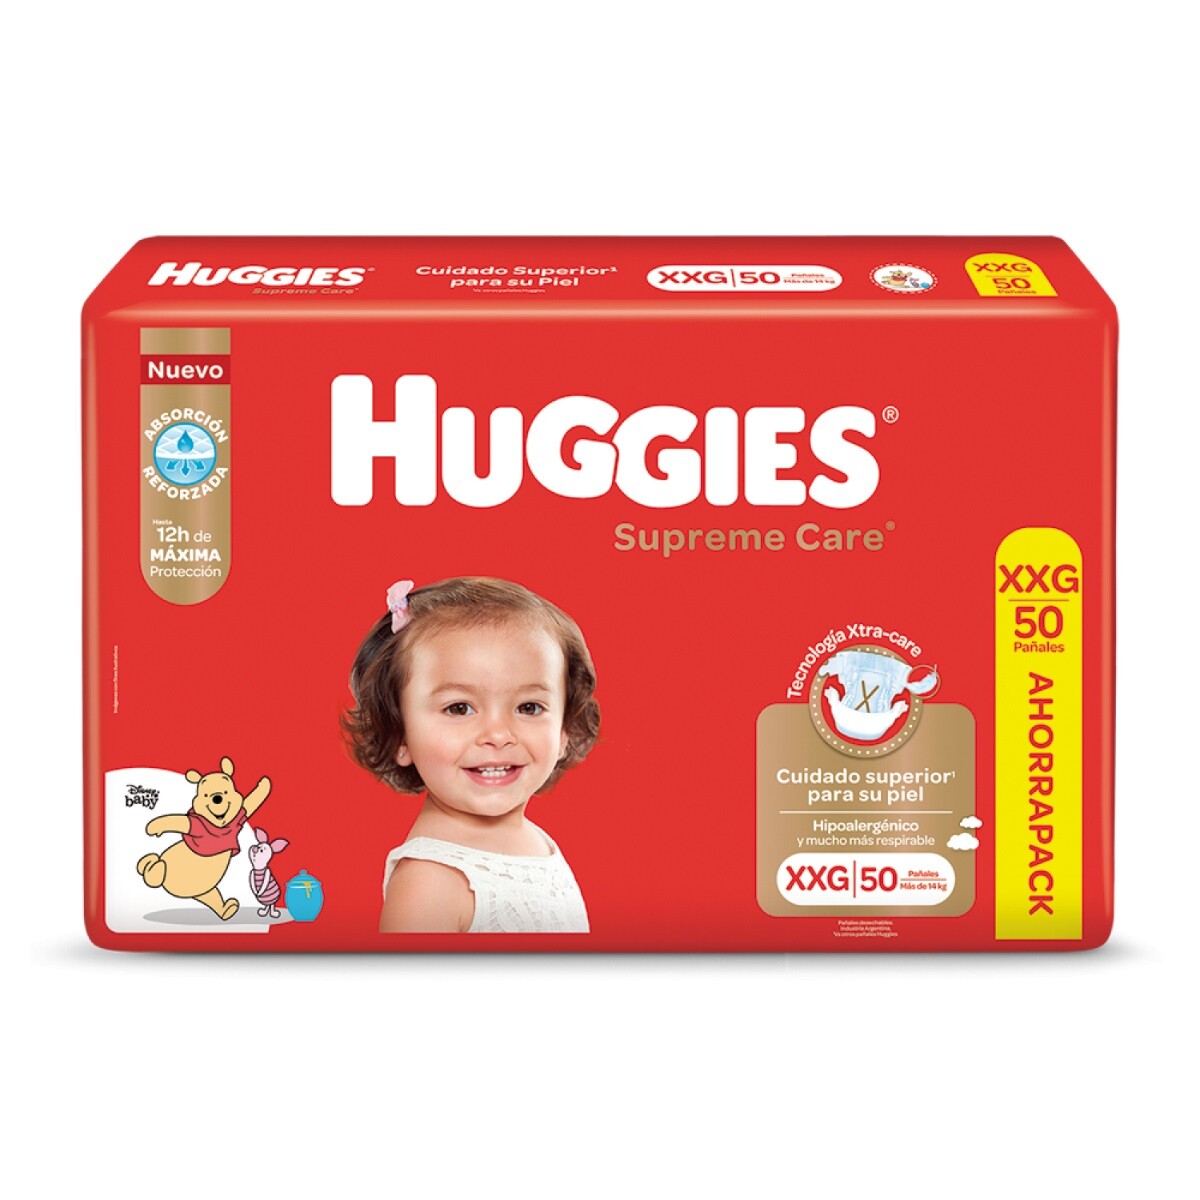 Pañales Huggies Supreme Care Talle Xxg 50 Uds. 